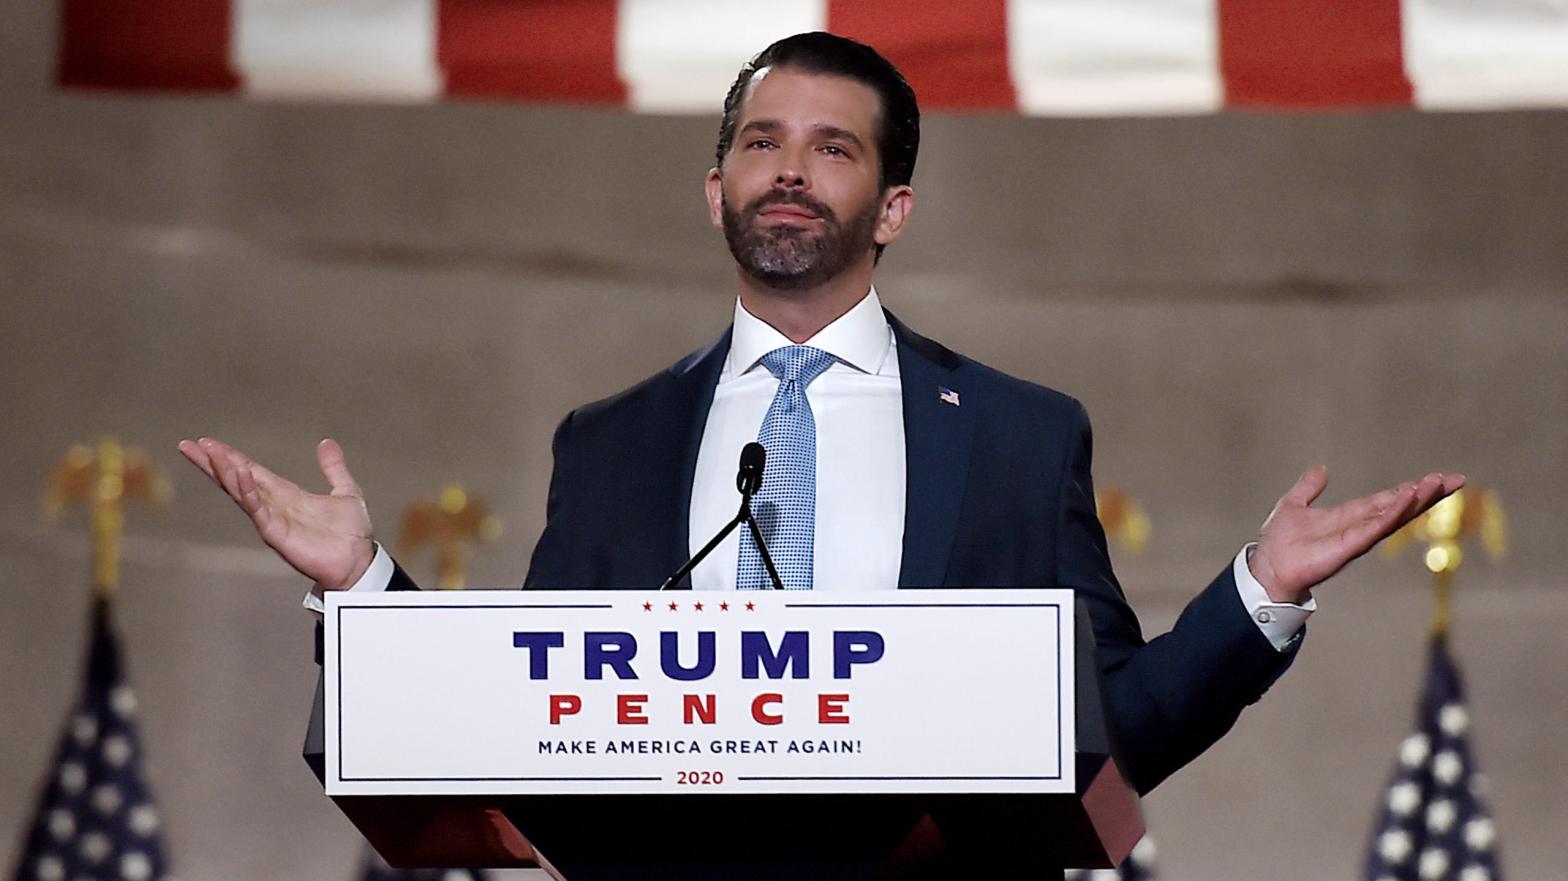 The president's eldest son Donald Trump Jr., pictured here speaking at a Republican convention in D.C. last summer, reportedly tested positive for the coronavirus this week. (Photo: Olivier Douliery, Getty Images)